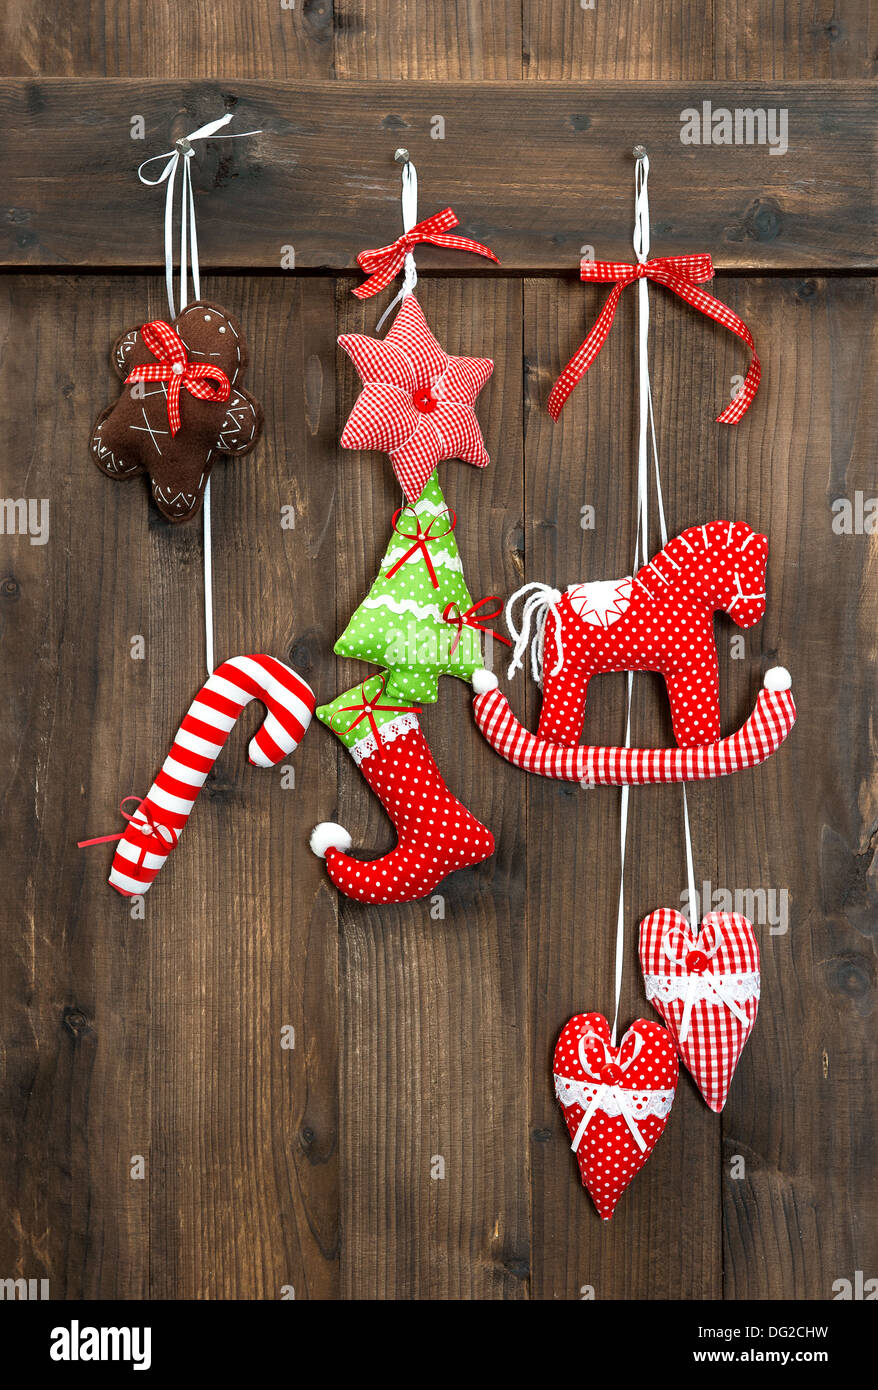 christmas decoration handmade toys hanging over rustic wooden background. nostalgic retro style picture Stock Photo